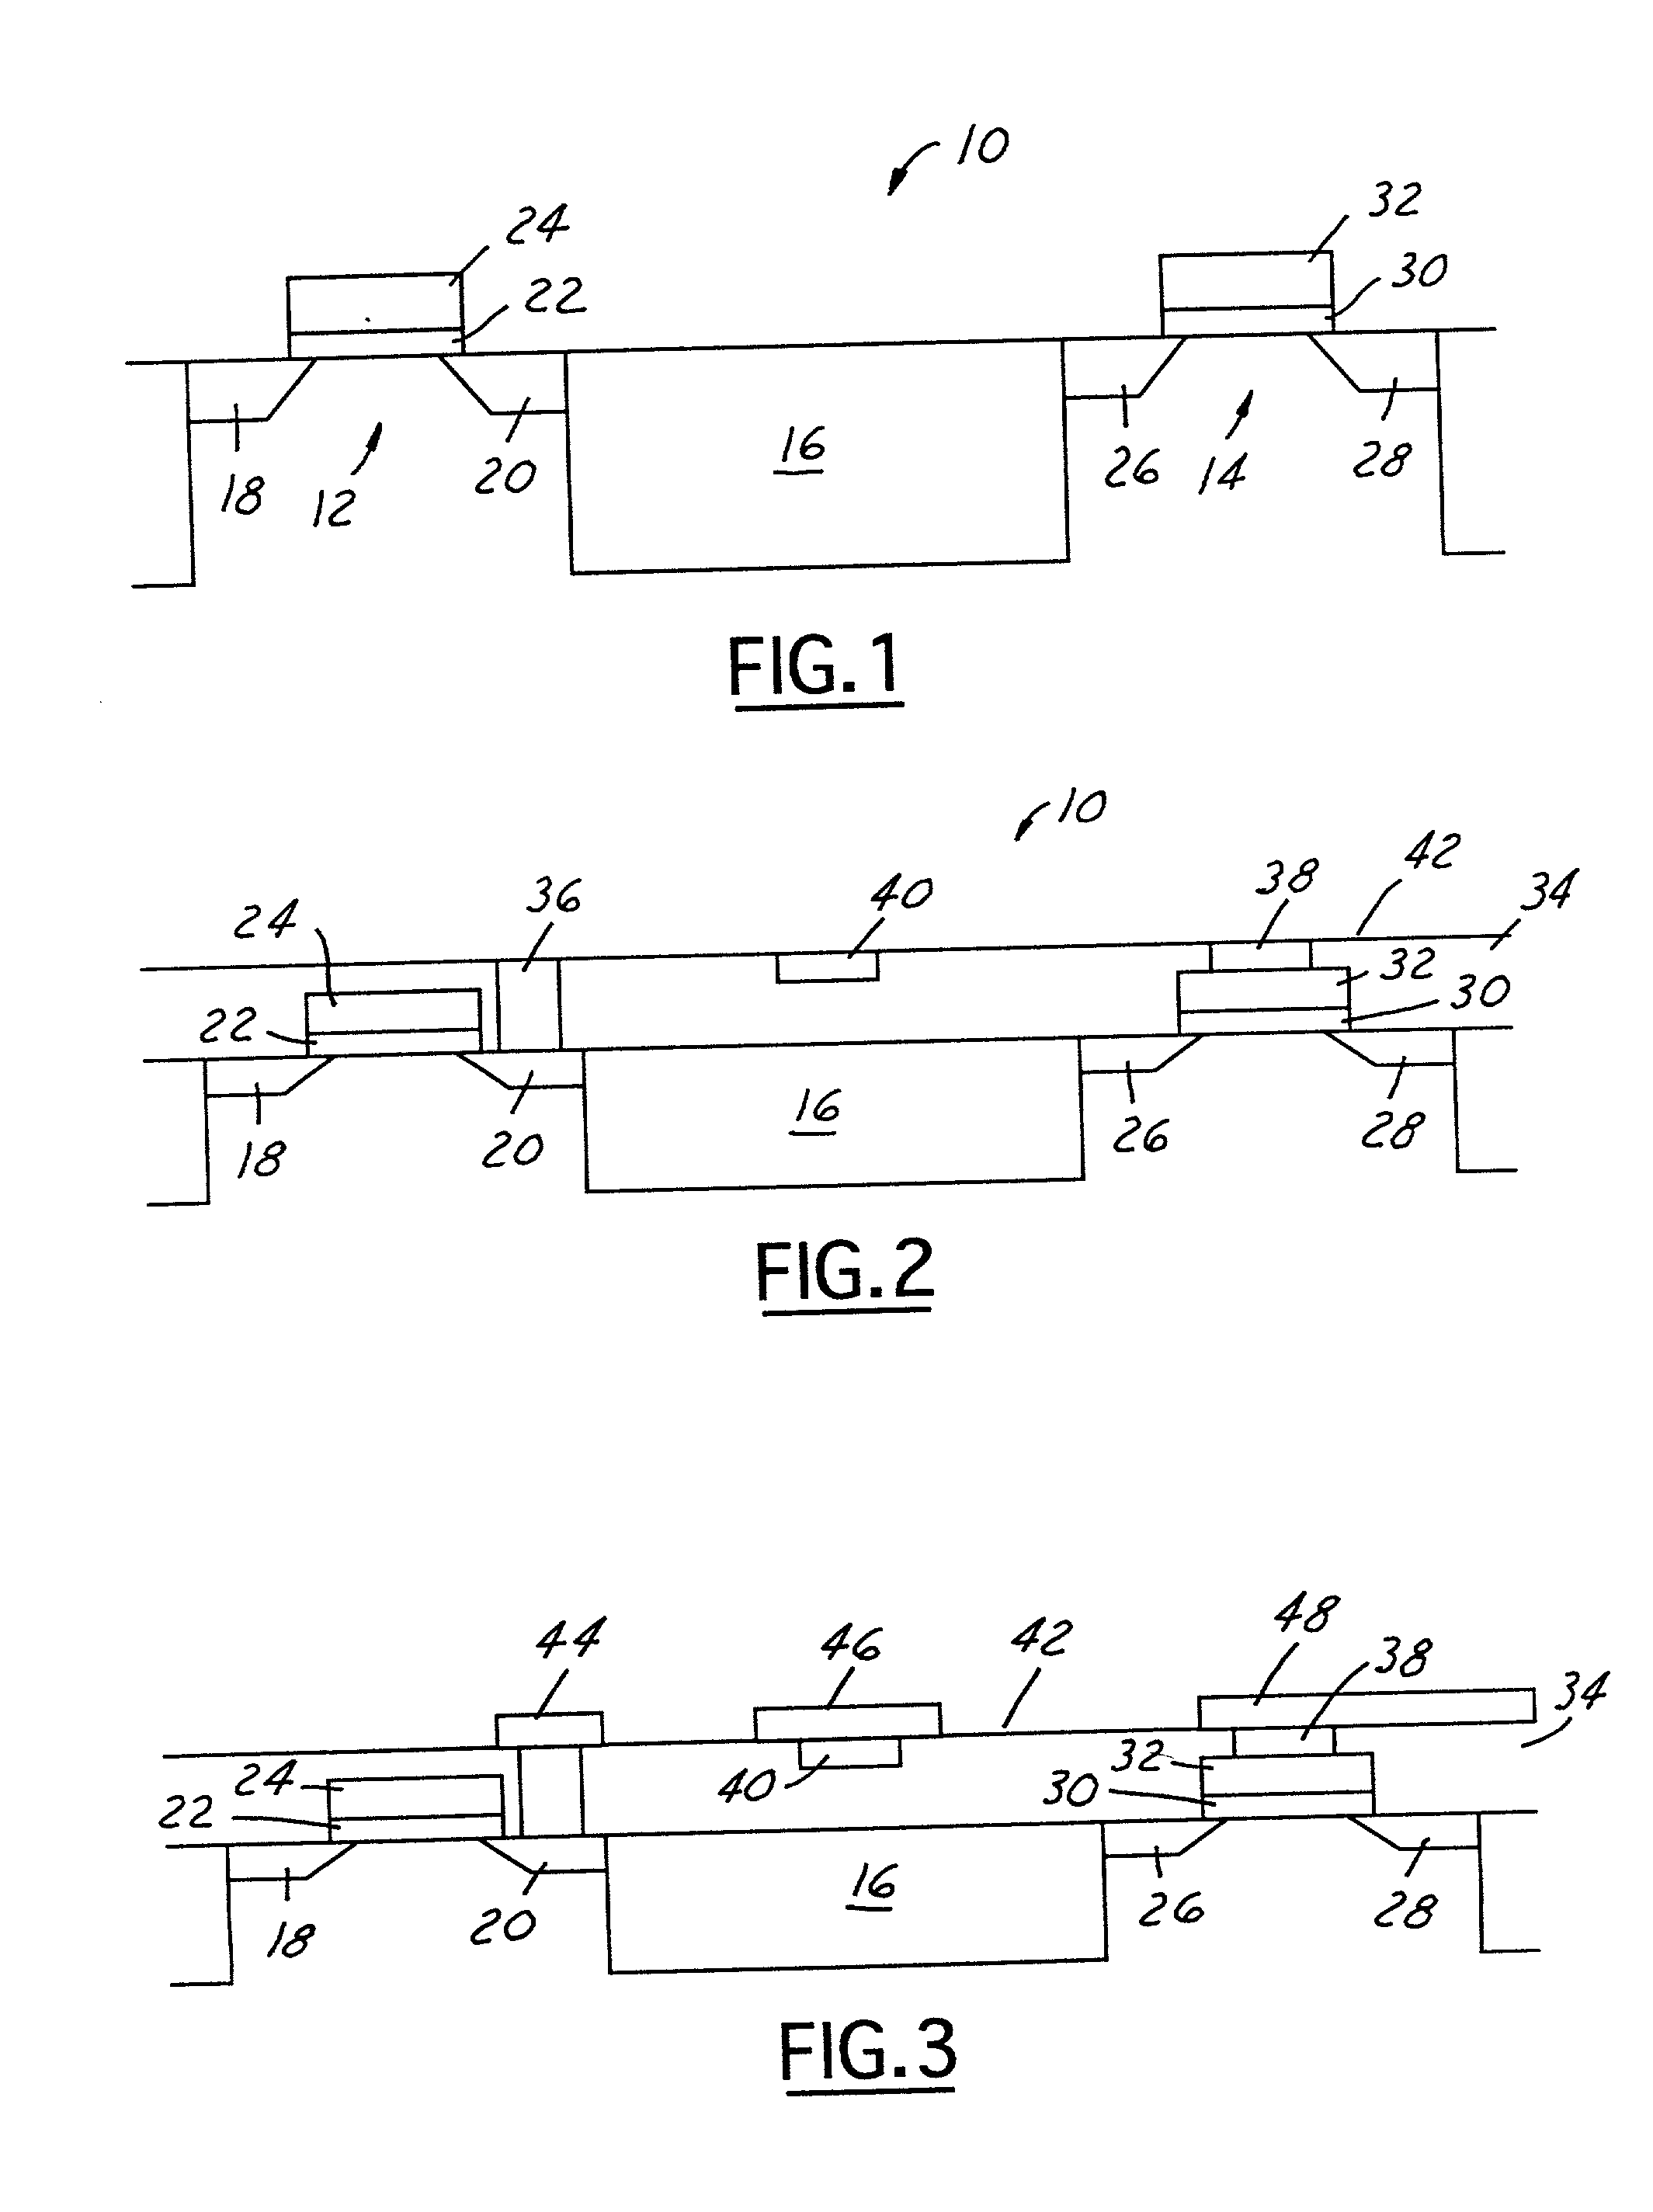 Semiconductor device incorporating elements formed of refractory metal-silicon-nitrogen and method for fabrication